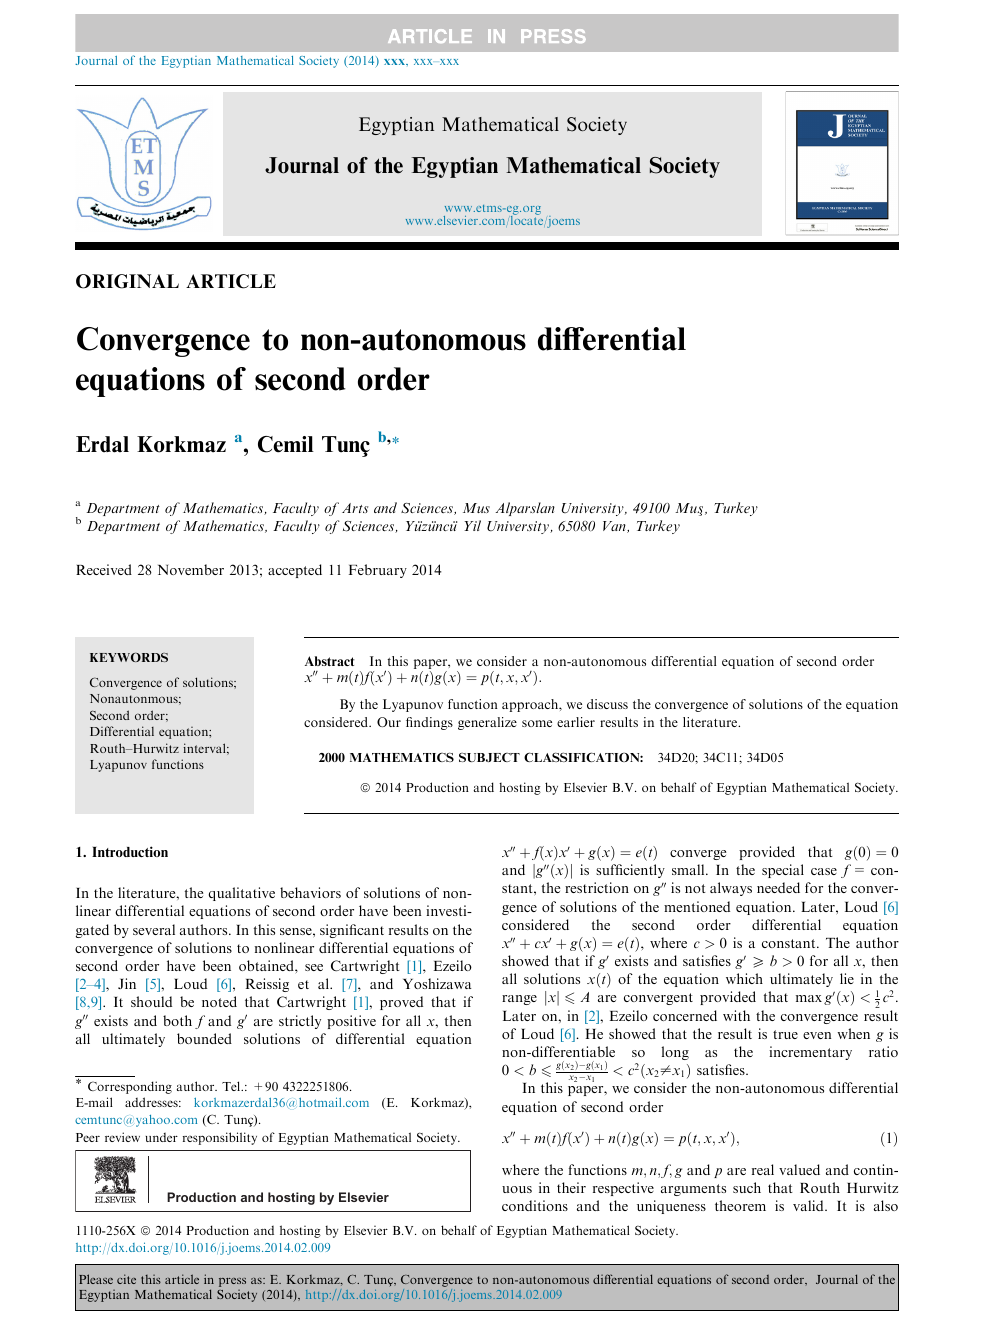 Convergence To Non Autonomous Differential Equations Of Second Order Topic Of Research Paper In Mathematics Download Scholarly Article Pdf And Read For Free On Cyberleninka Open Science Hub